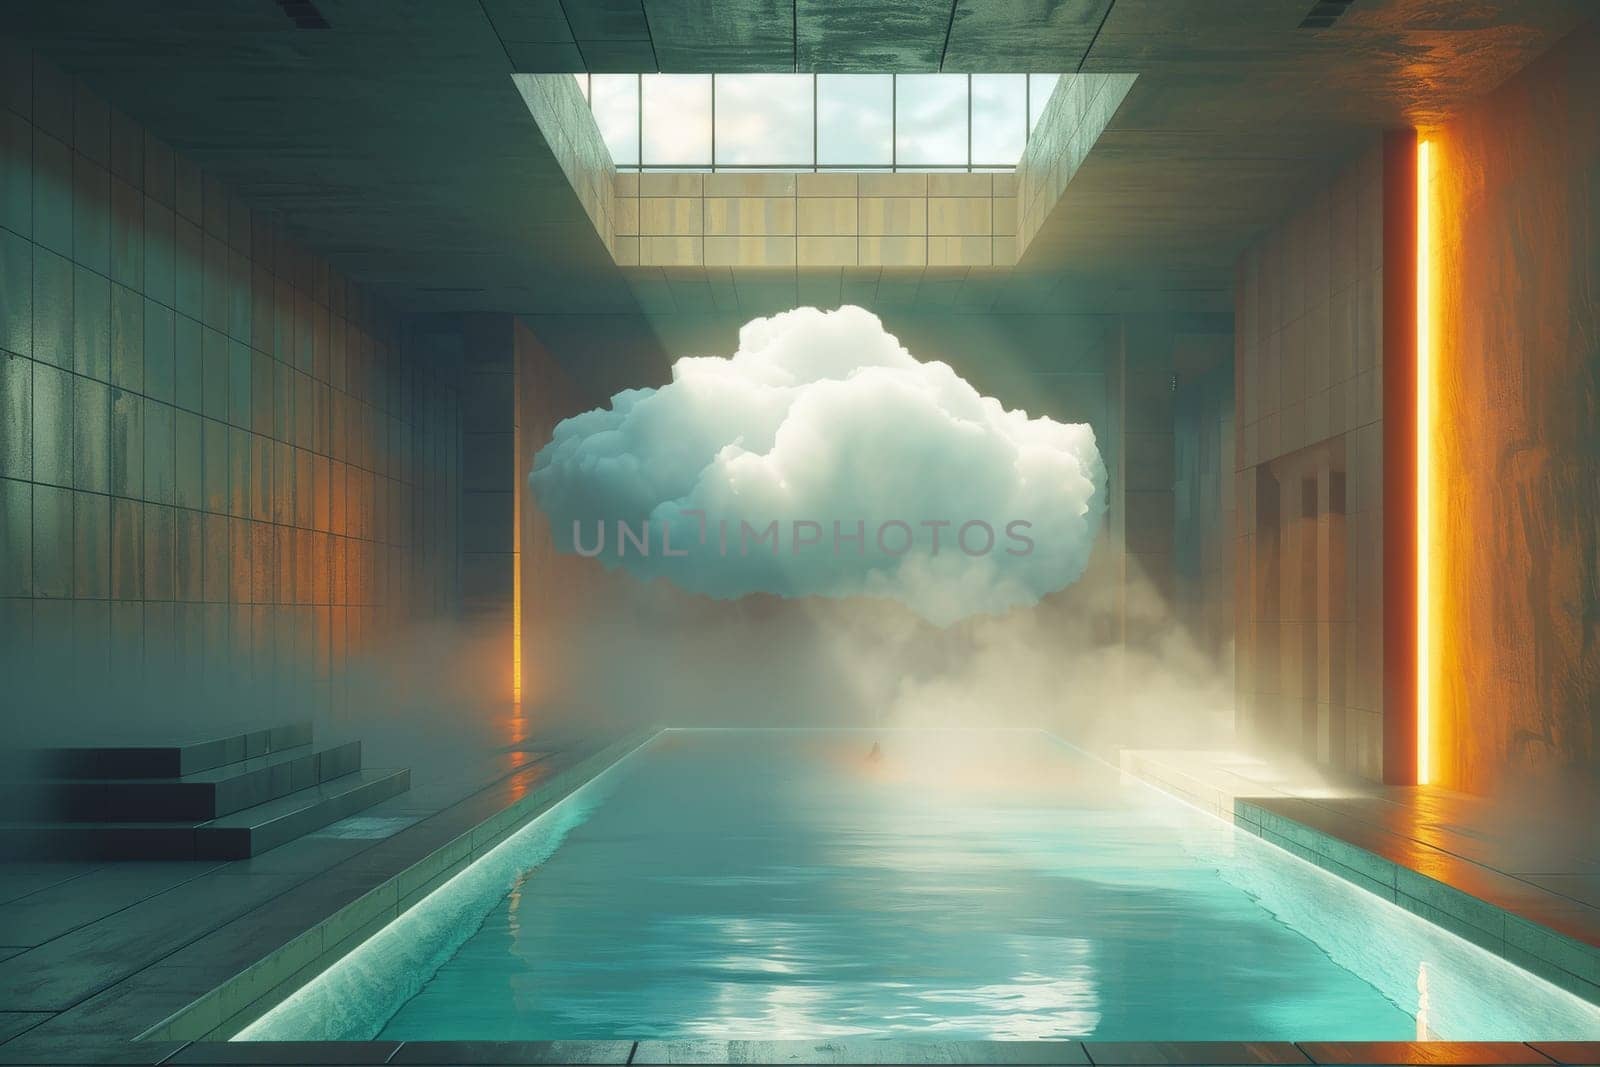 A cloud is floating above a swimming pool. The pool is surrounded by a concrete wall and has a glass ceiling. Scene is serene and peaceful, as the cloud seems to be floating above the water